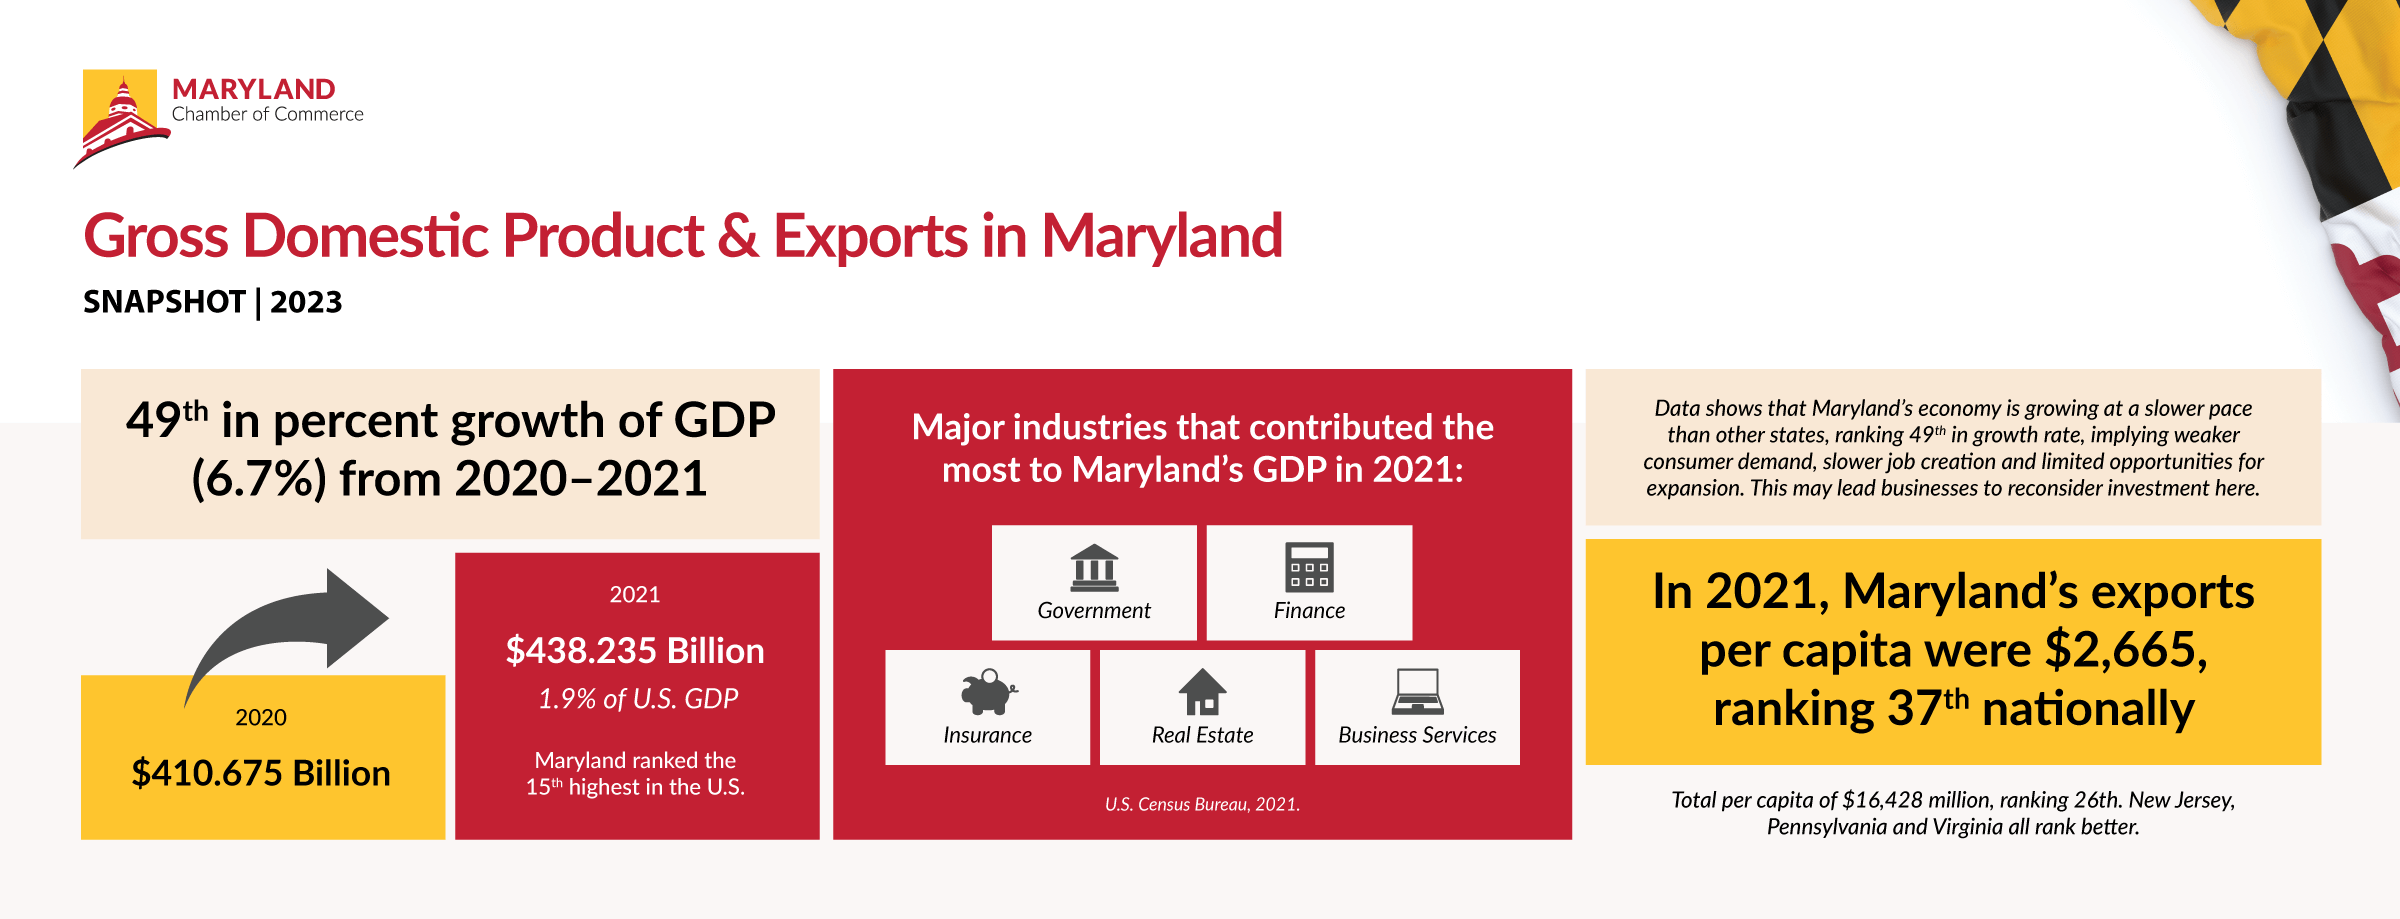 An infographic that indicates that: Maryland is ranked 49th in percent growth of GDP (6.7%) from 2020-2021 That Maryland's GDP was $410.675 Billion in 2020 and $438.235 Billion (or 1.9% of U.S. GDP) in 2021, and that Maryland ranked the 15th highest in the US for GDP. The major industries that contributed to the most to Maryland's GDP in 2021 were government, finance, insurance, real estate, and business service. Data shows that Maryland's economy is growing at a slower pace than other states, ranking 49th in growth rate, implying weaker consumer demand, slower job creation and limited opportunities for expansion. This may lead businesses to reconsider investment here. That in 2021, Maryland's exports per capita were $2,665, ranking 37th nationally. Maryland's total per capita of $16,428 Million ranked 26th, with New Jersey, Pennsylvania and Virginia all ranking better her.